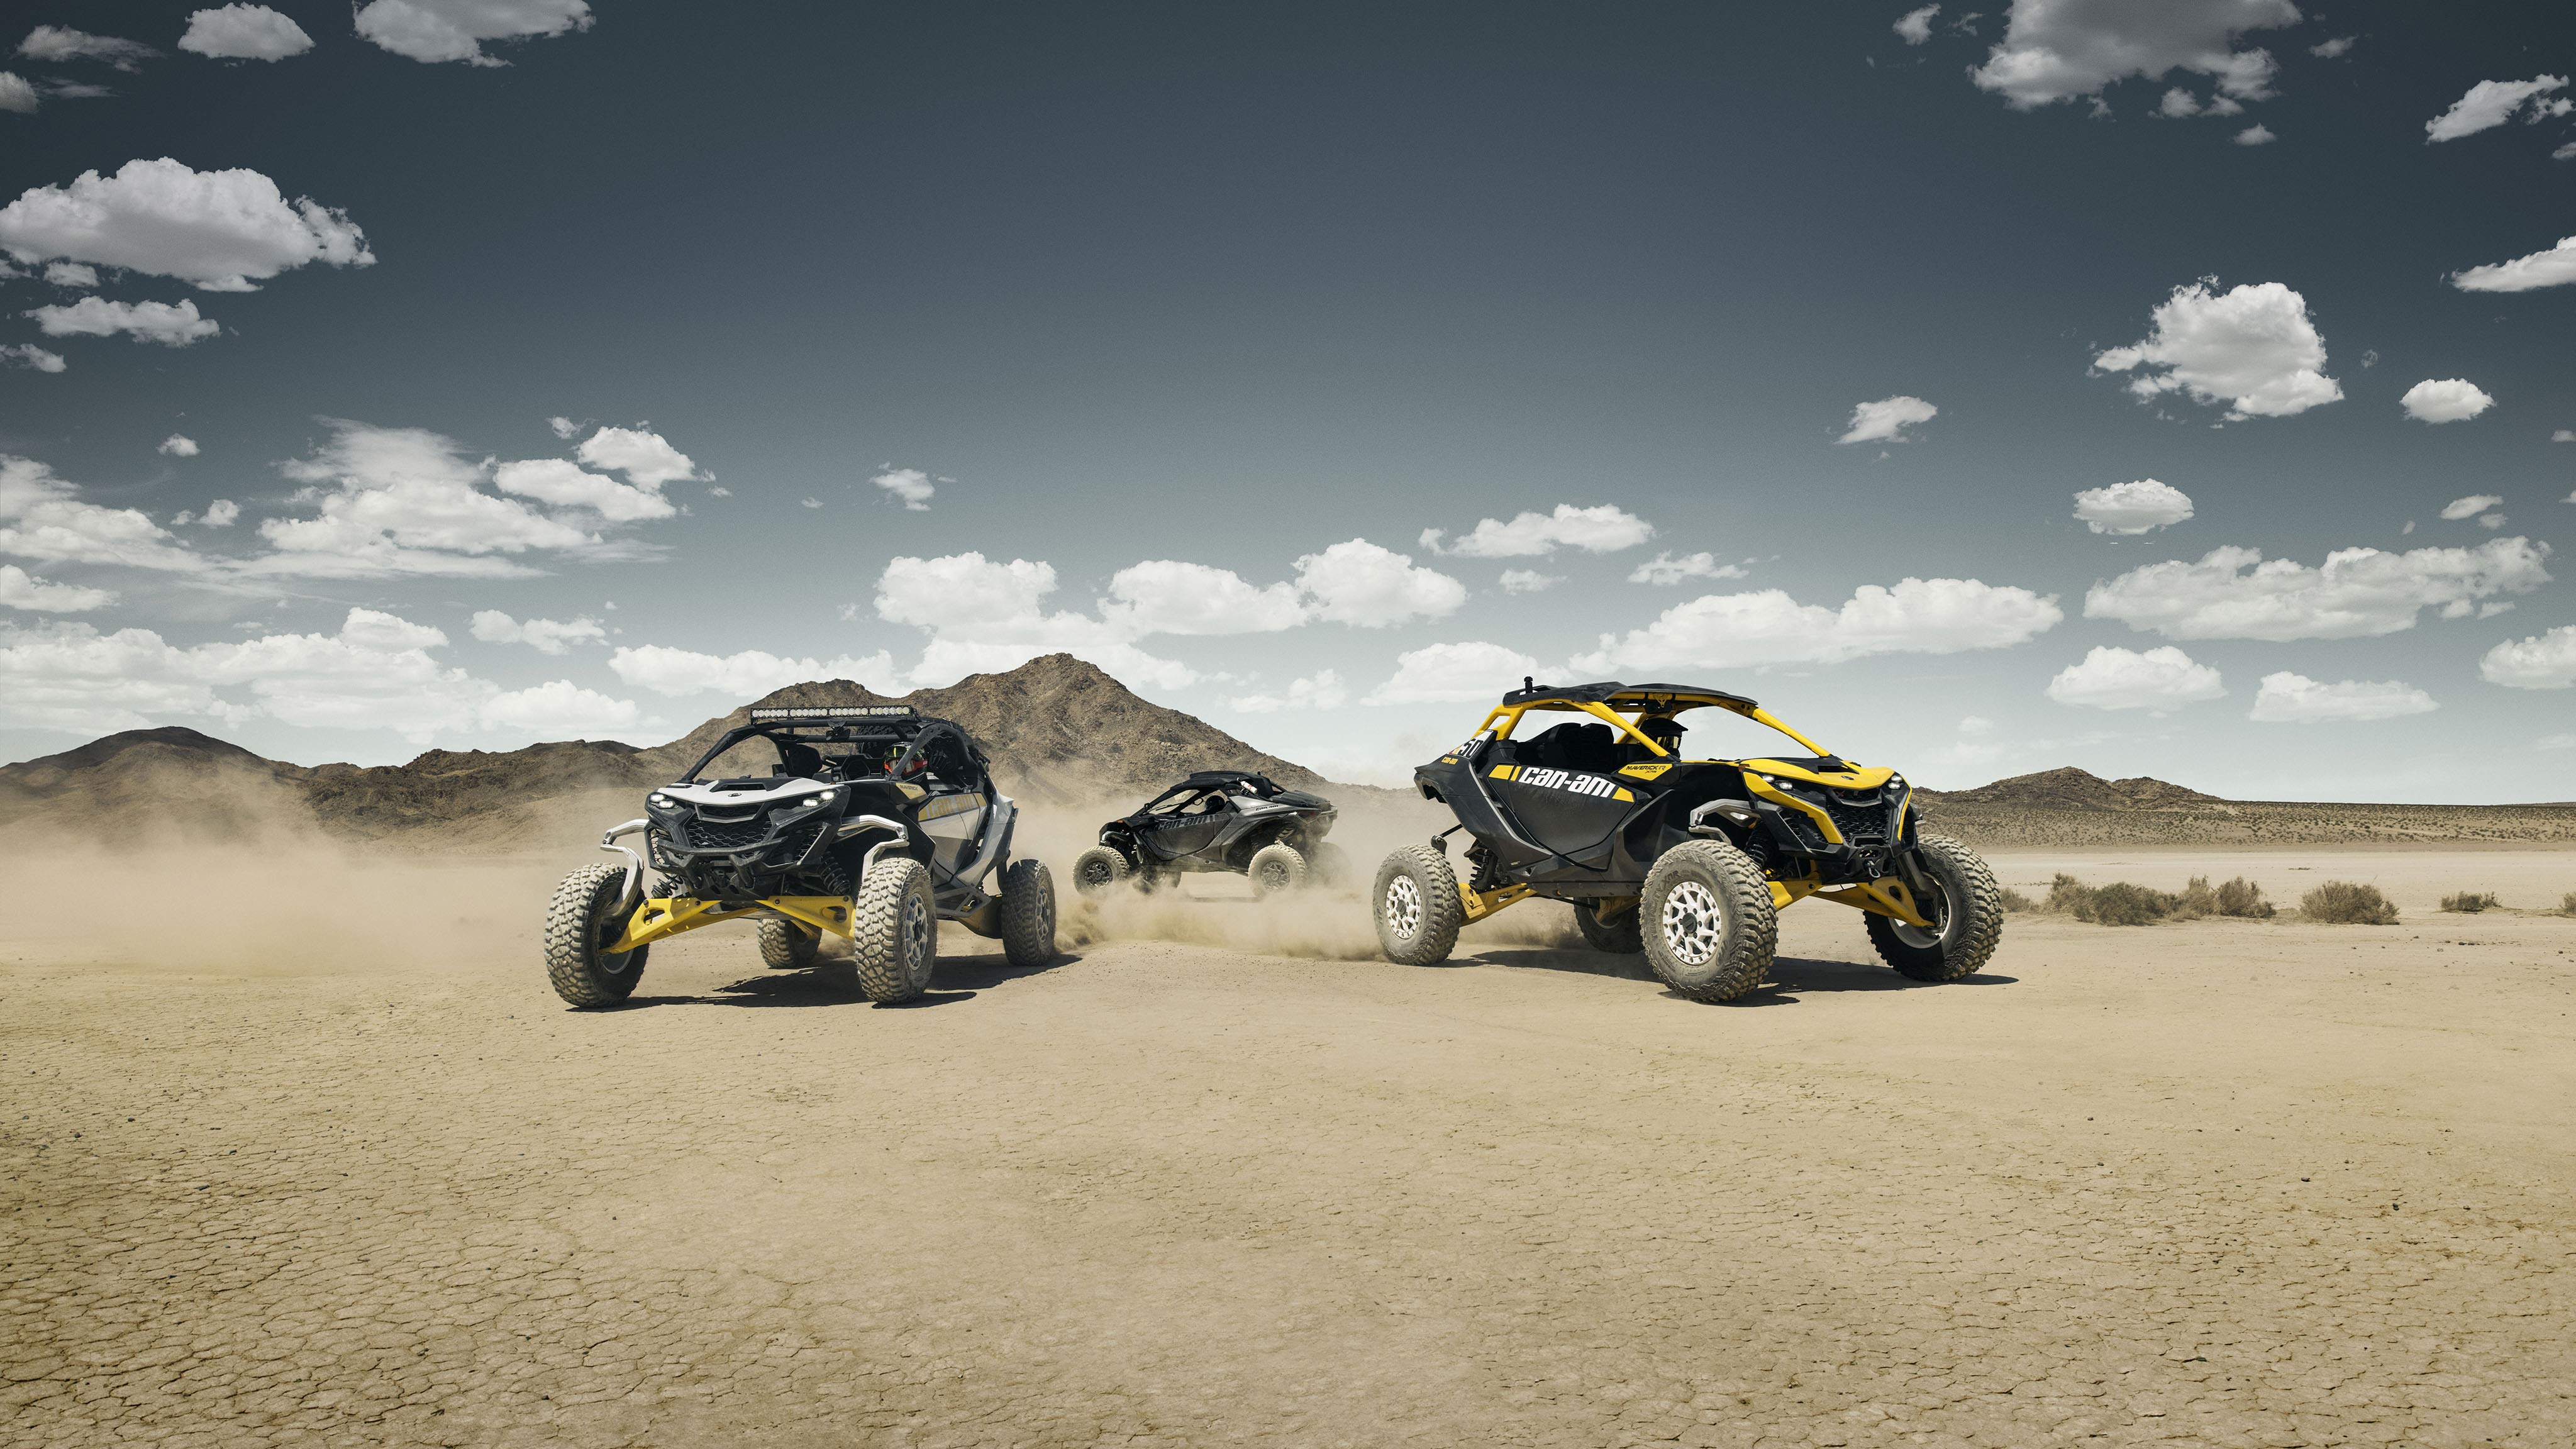 3 side-by-side vehicle in the desert